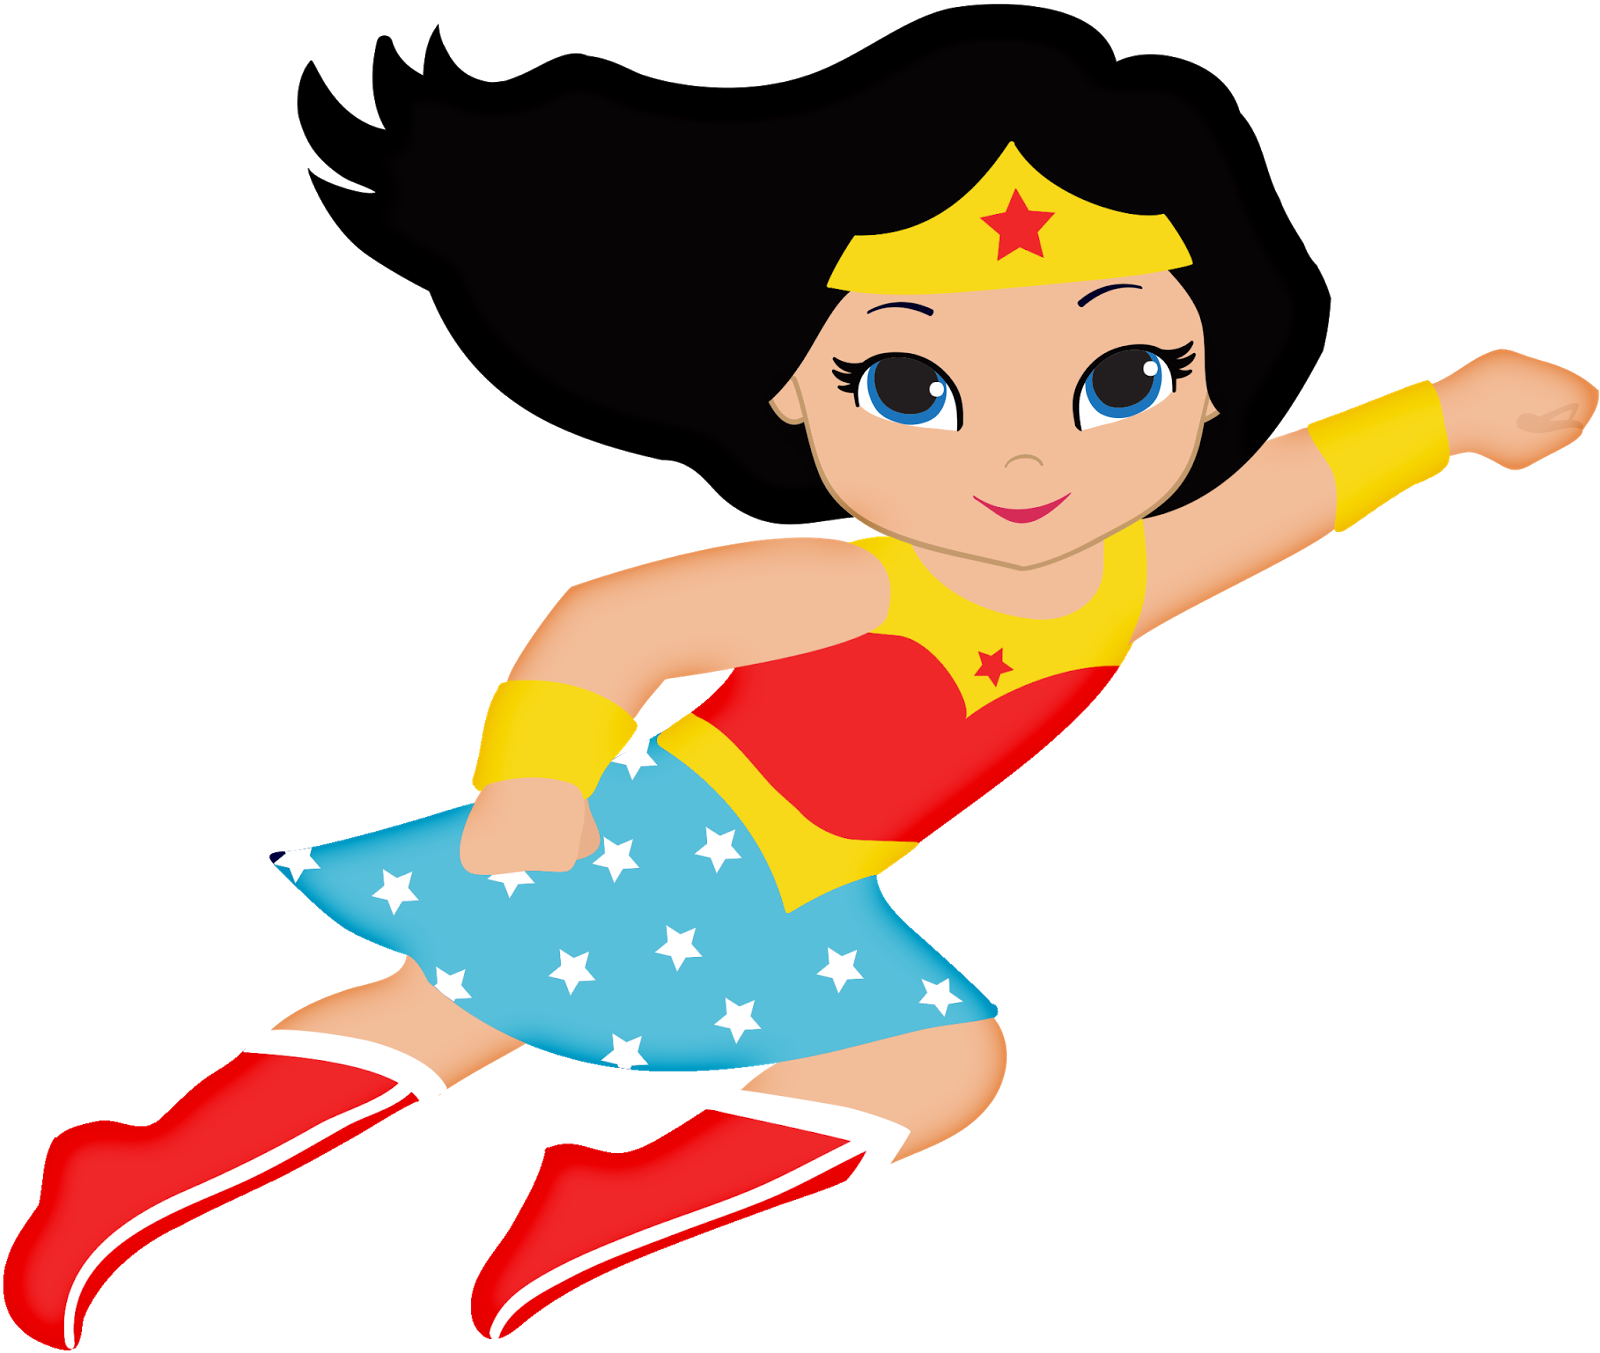 Wonder woman baby oh. Young clipart sweet person